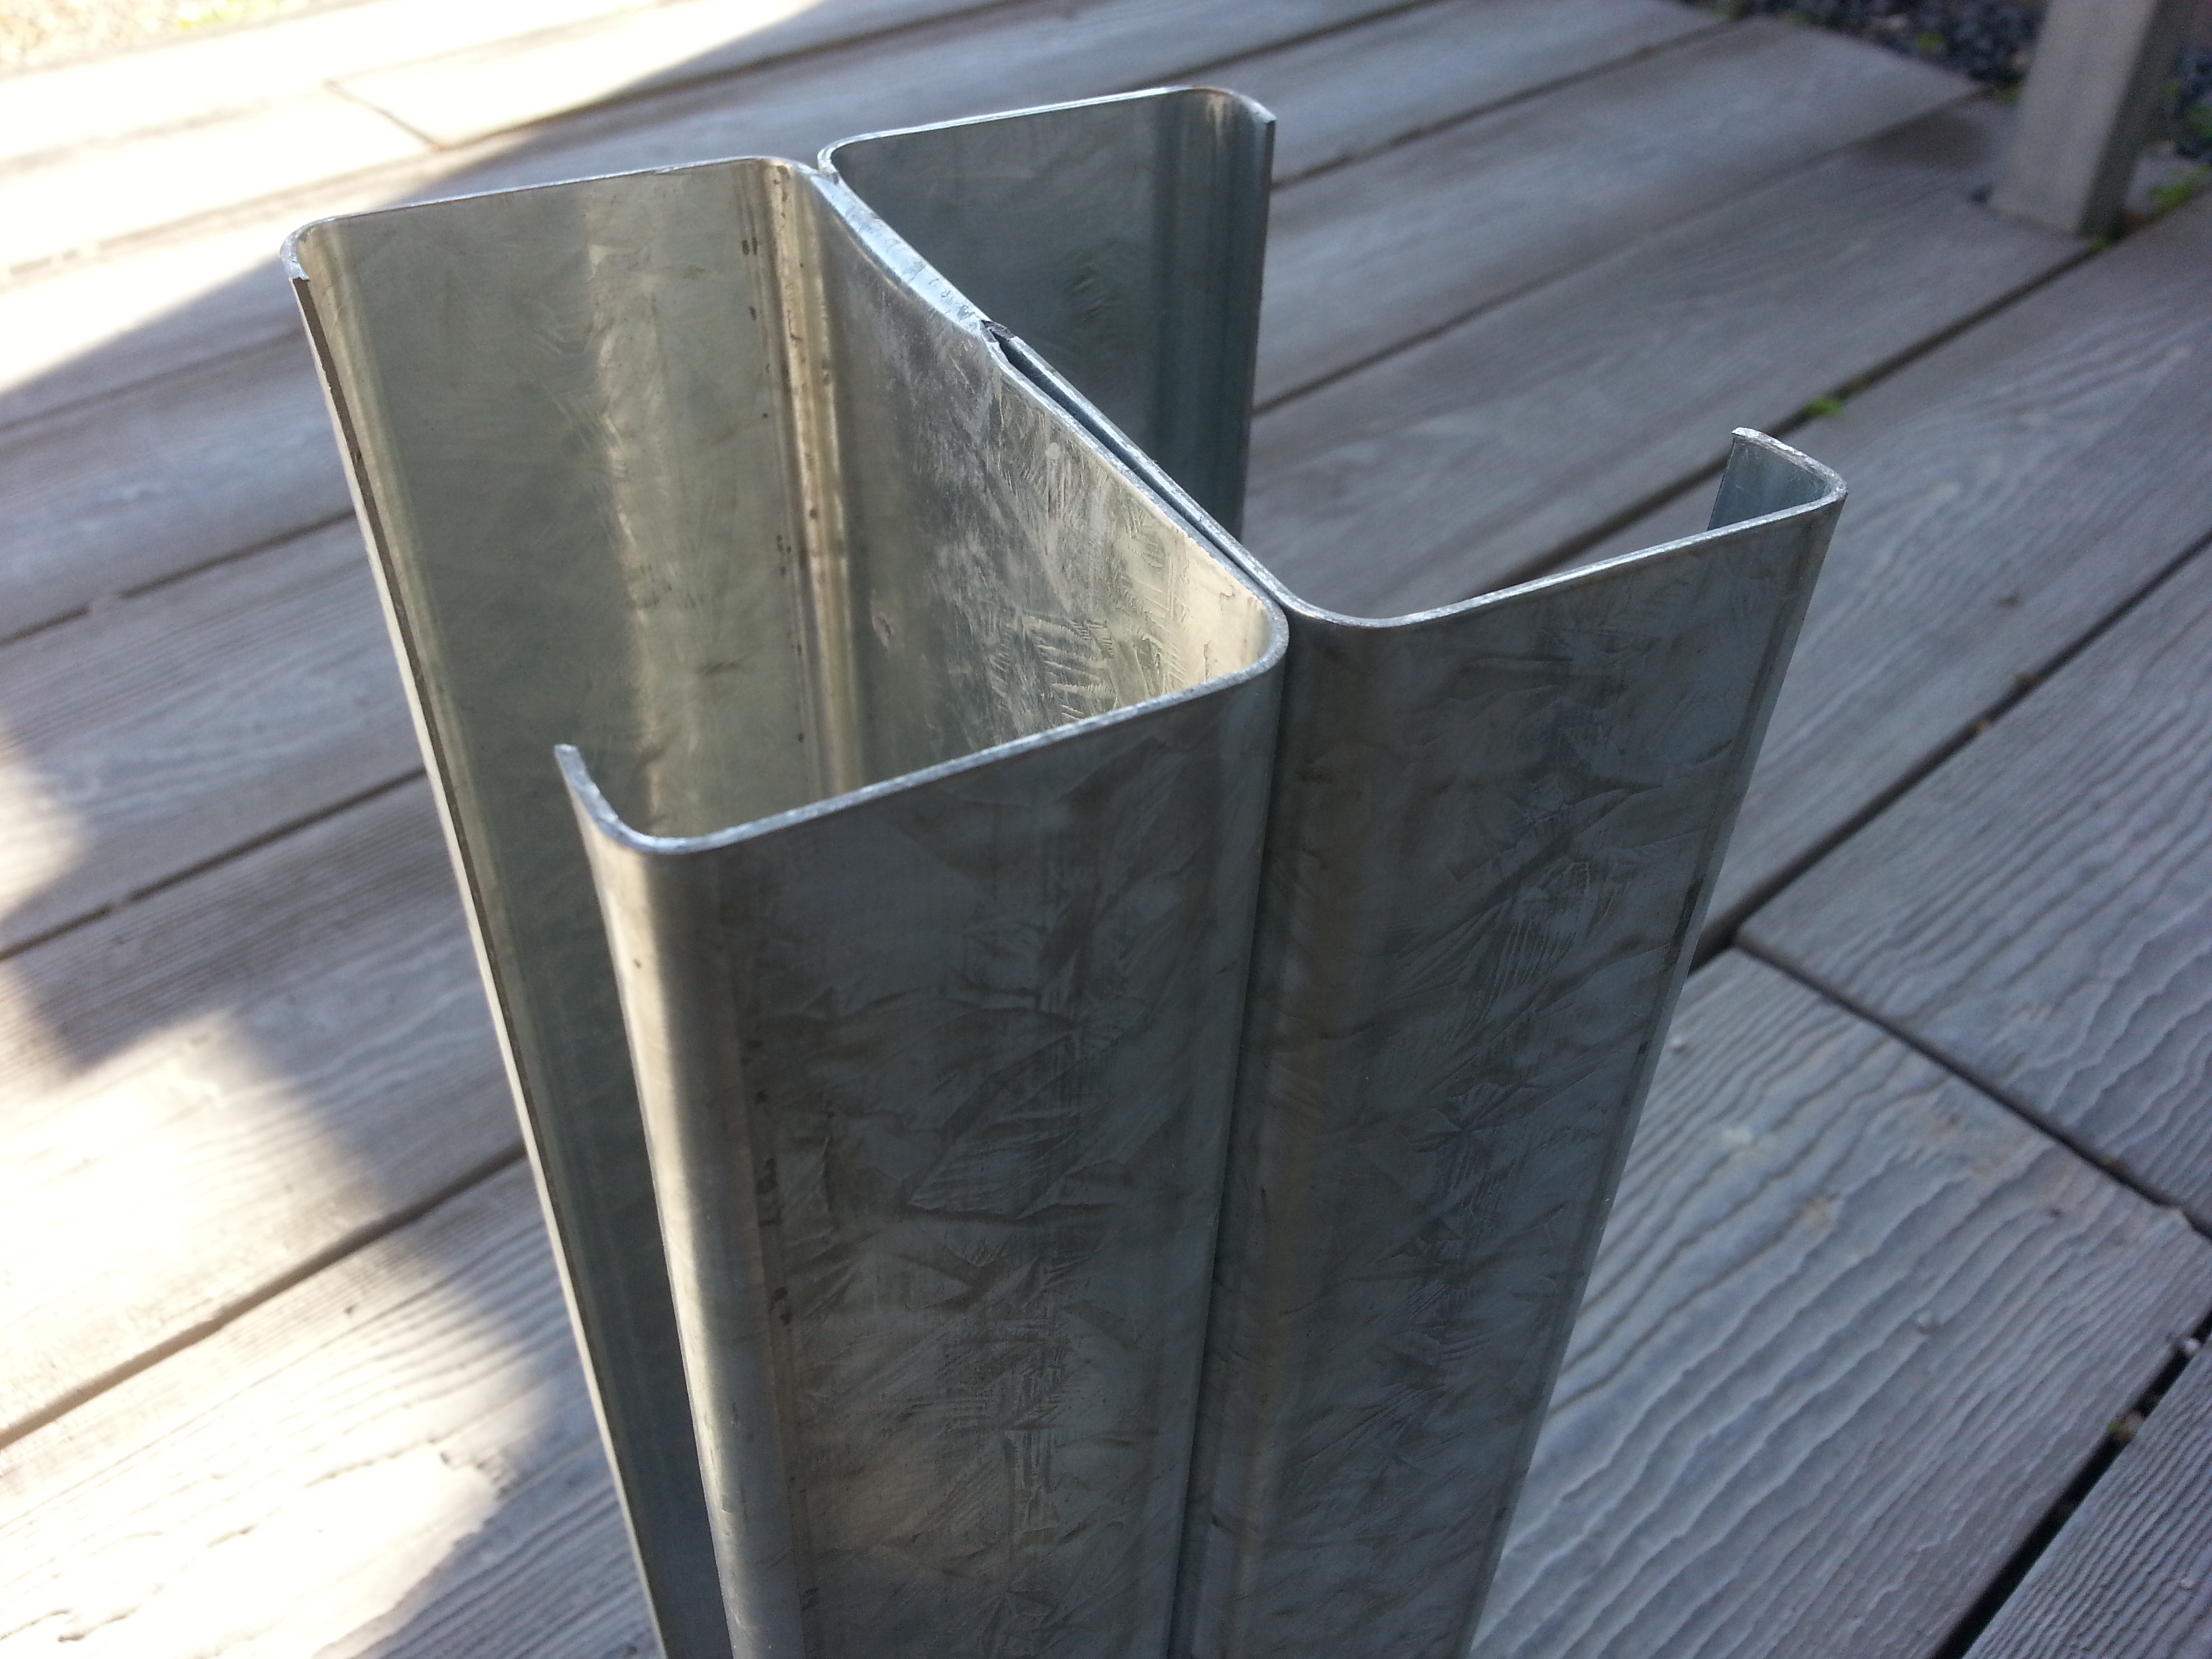 Steel Posts Canberra - Hot Dipped Galvanised Steel Canberra